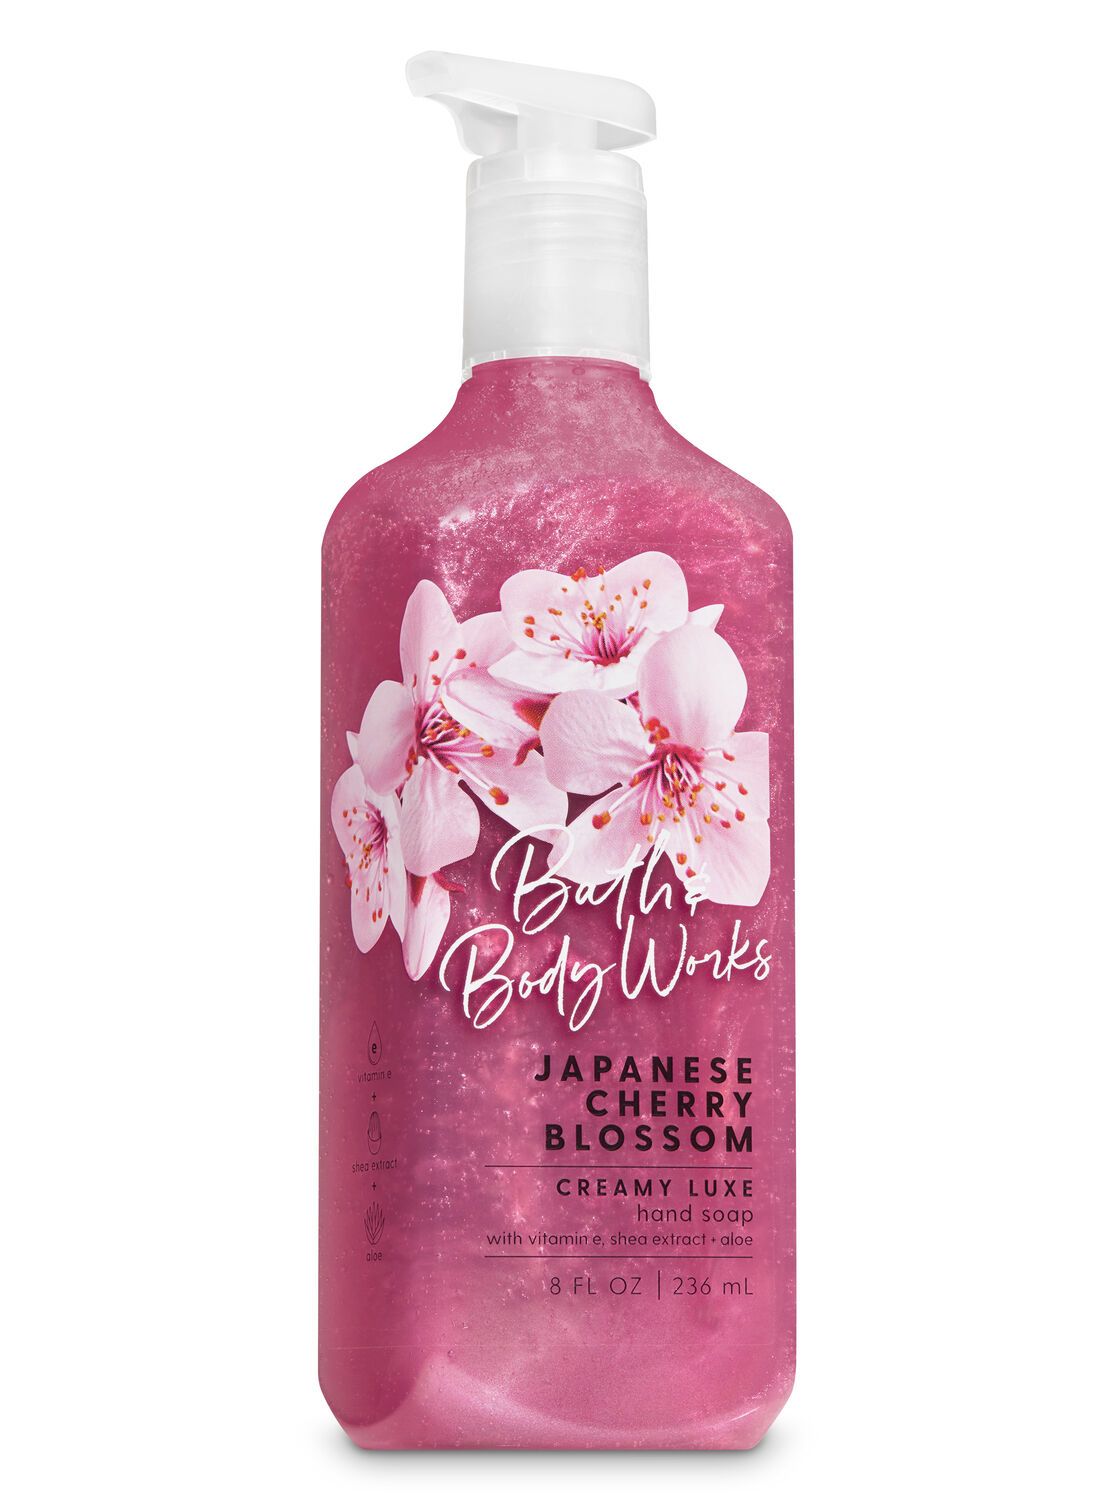 Japanese Cherry Blossom Creamy Luxe Hand Soap | Bath & Body Works